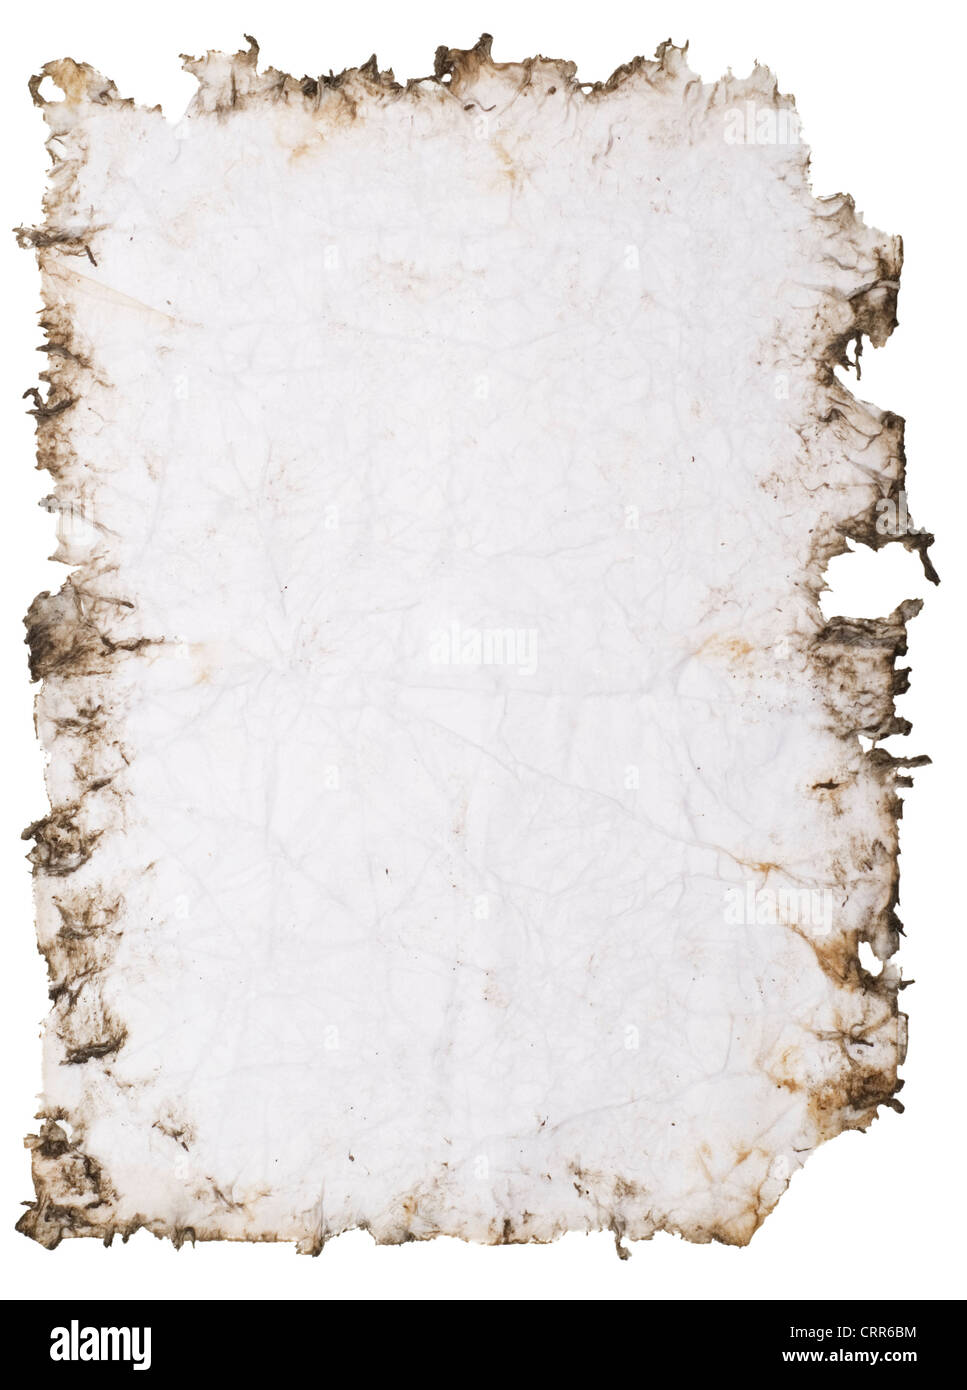 12 Vintage Paper Textures with Rough Edges and Transparent Backgrounds